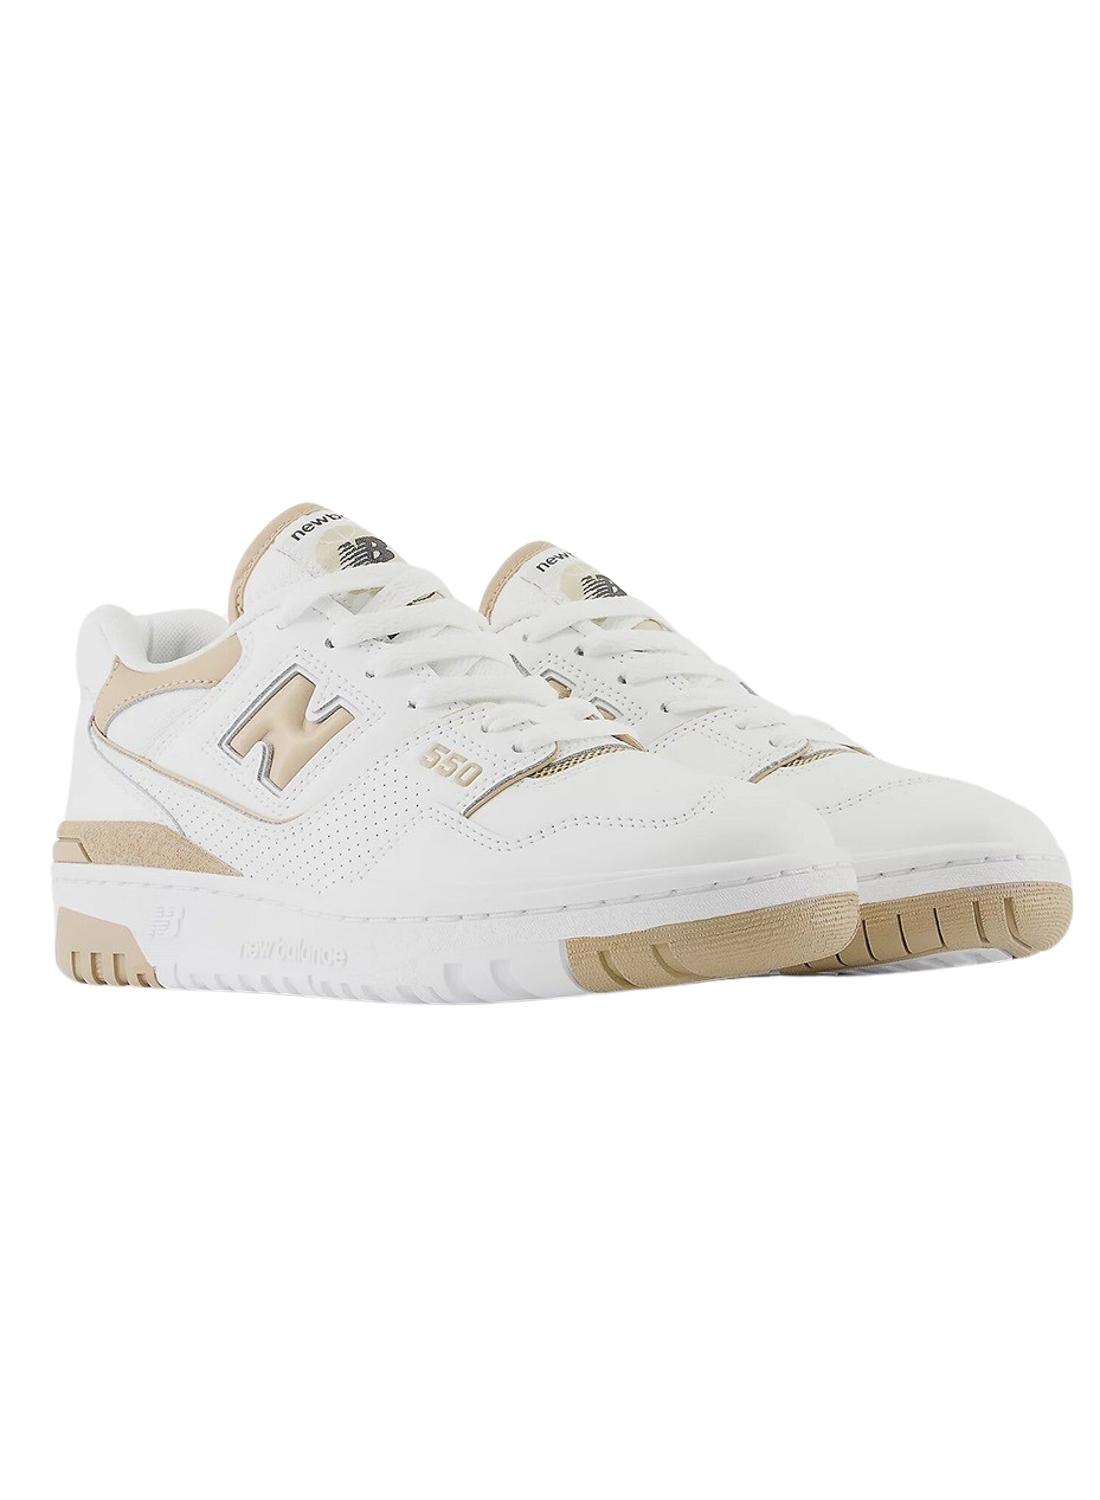 Sneakers New Balance BB550 Bianco Camel Donna